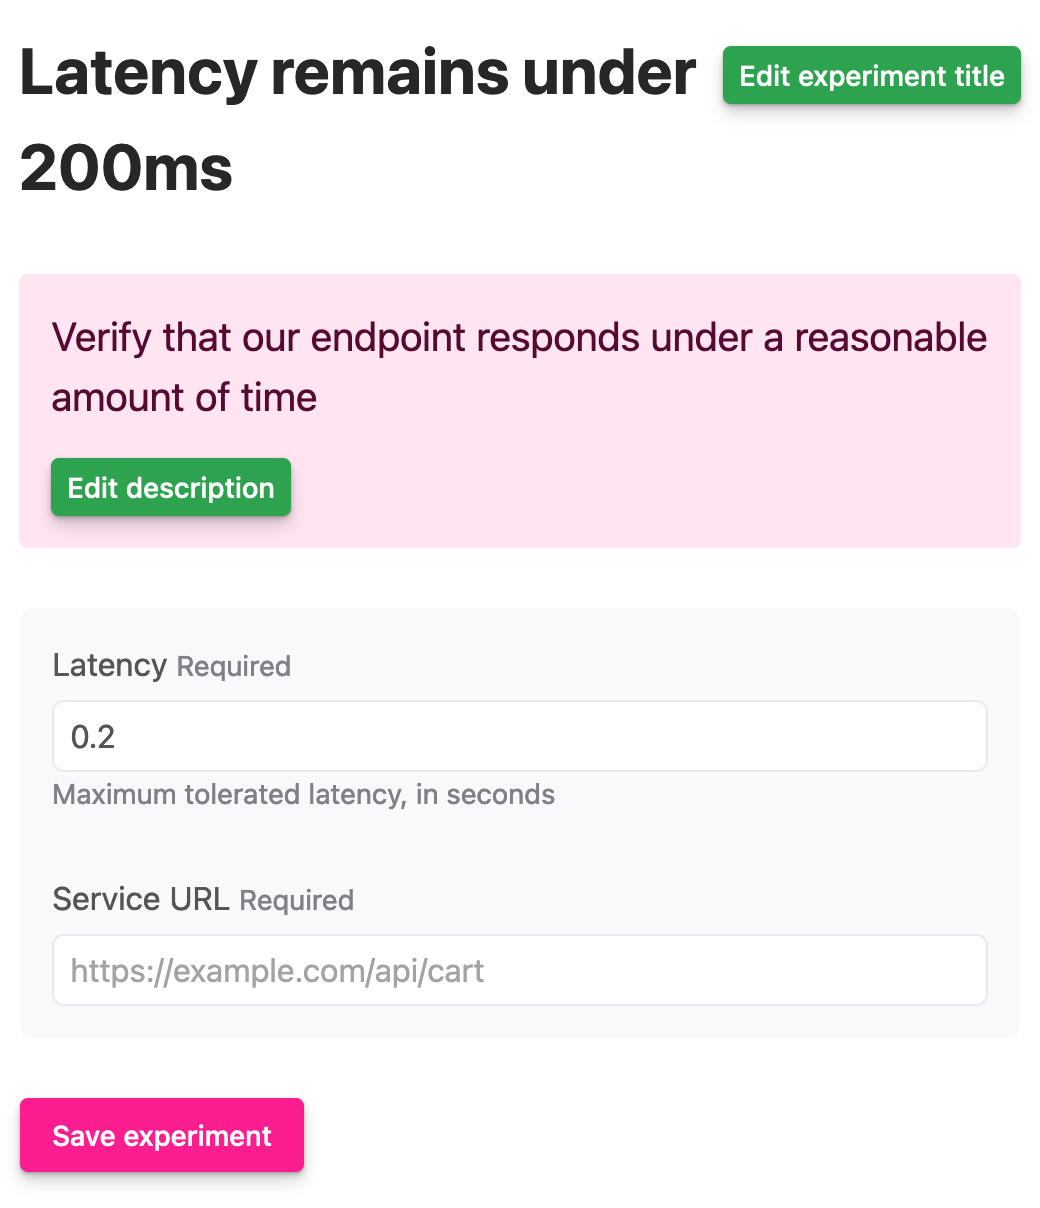 The form for custom templates that prompts a user for a latency and a service URL, allowing them to create an experiment they can then run on-demand.